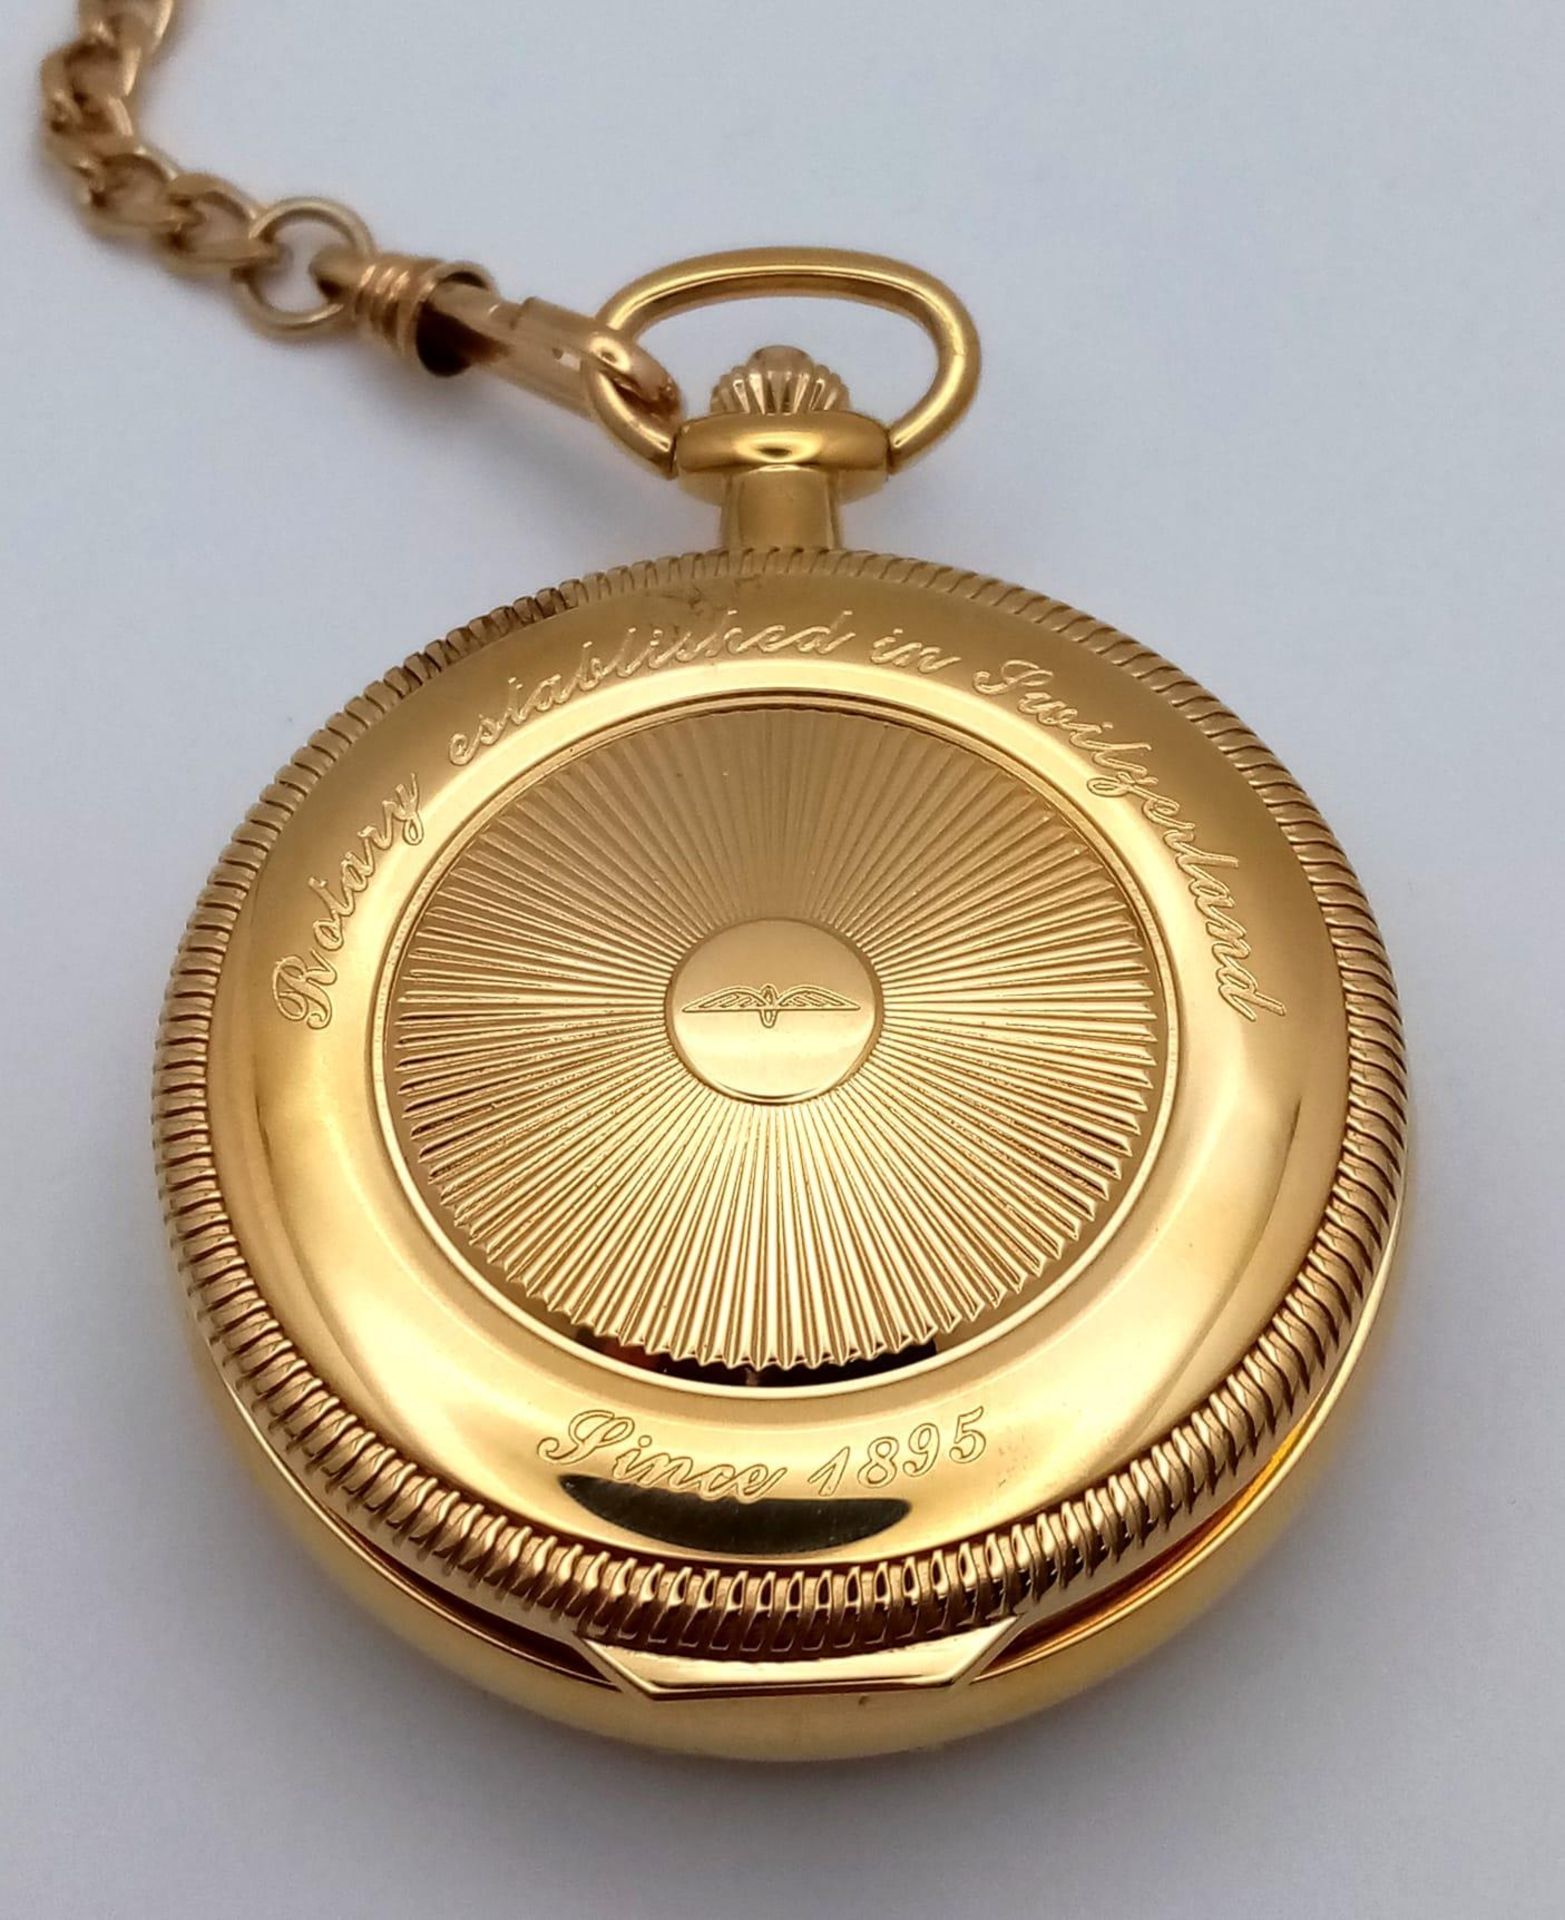 An Unworn Gold Plated Rotary Manual Wind Pocket, Date Watch. 4 Day Power Reserve. With Albert Chain. - Image 7 of 8